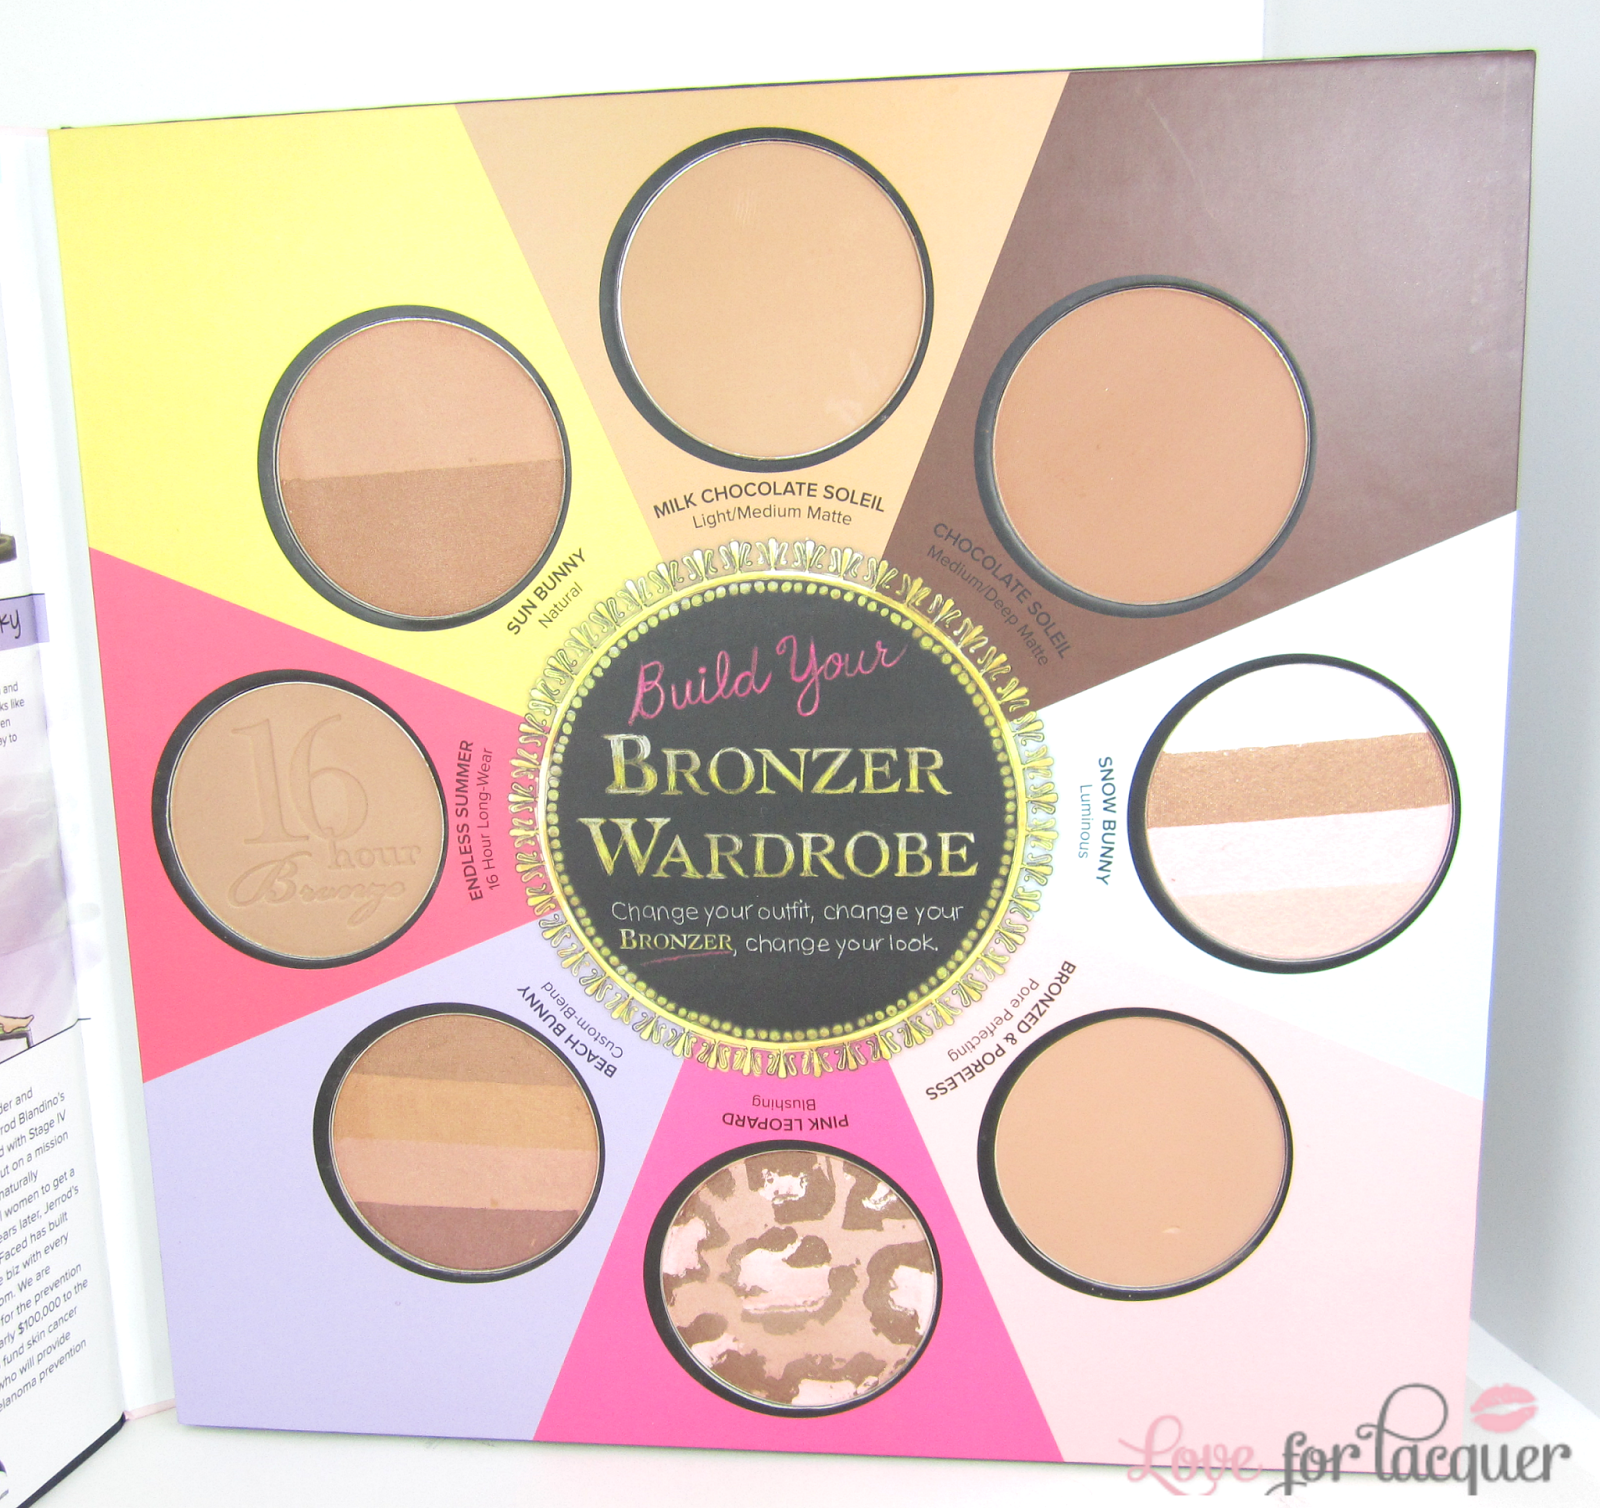 Too Little Black Book Of Bronzers Review - Love for Lacquer